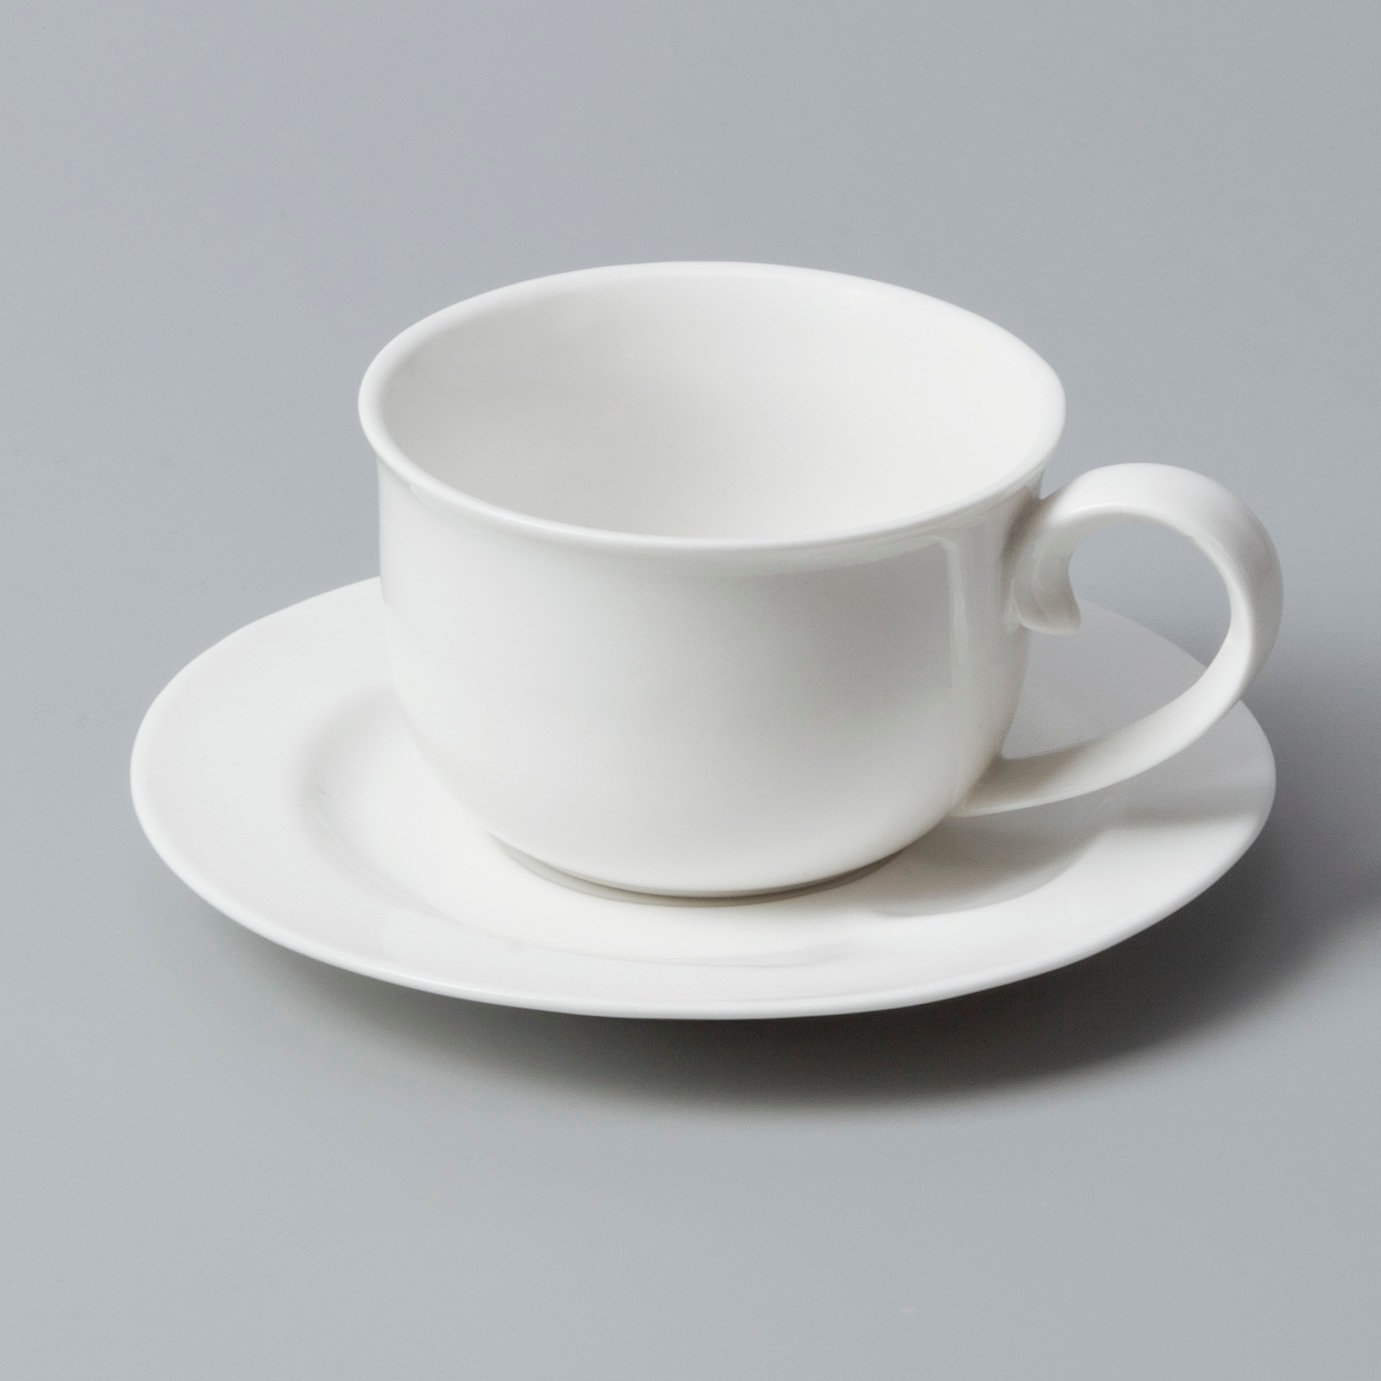 Two Eight hotel dinner set for business for hotel-8